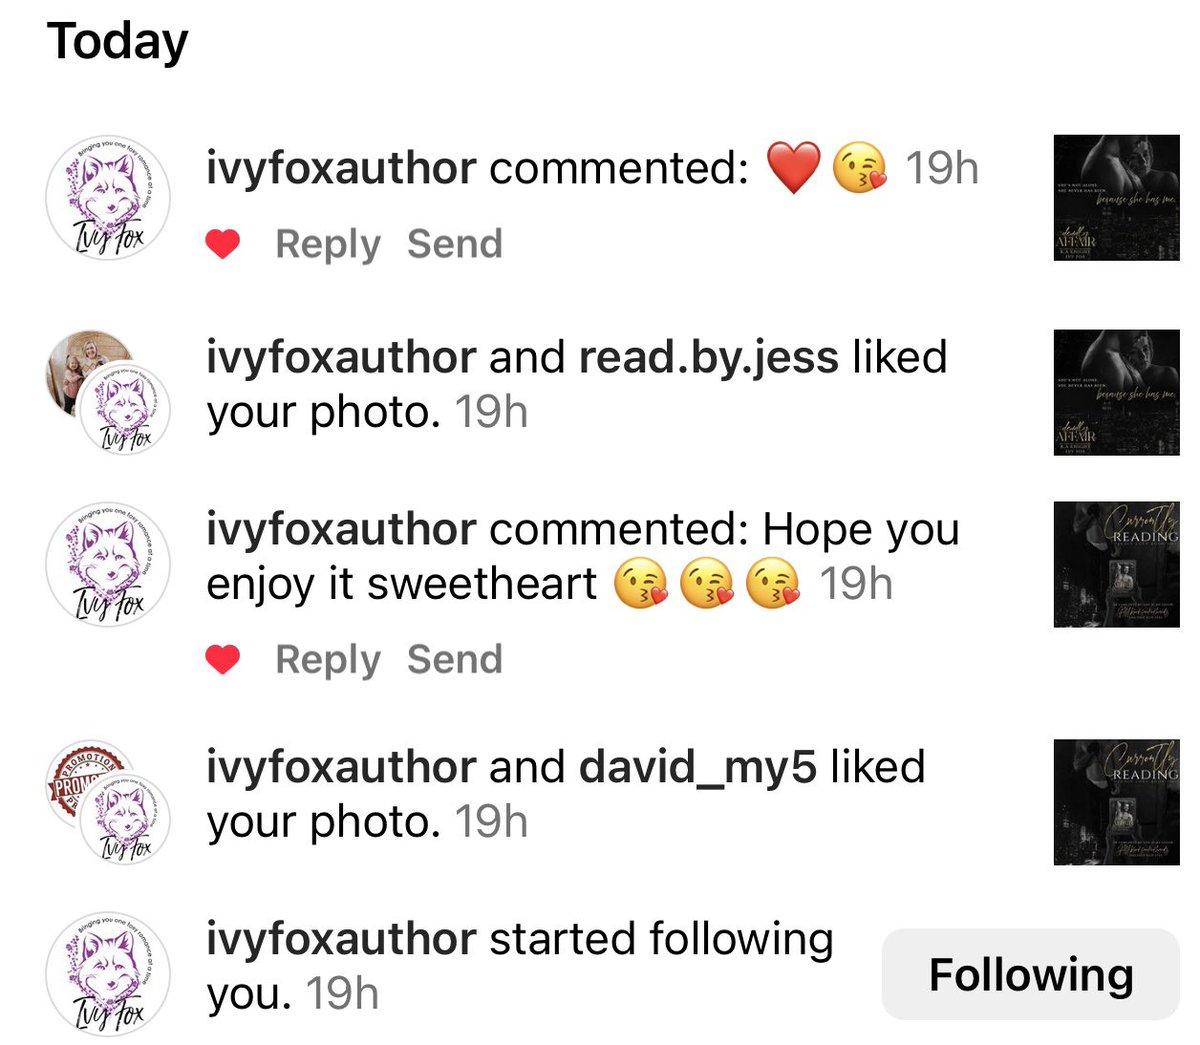 Well this happened! Not only did I get an ARC copy of her newest book, but an author that I love decided to follow me on instagram 🥰 #deadlyaffair #ivyfoxauthor #wordsmithpublicity